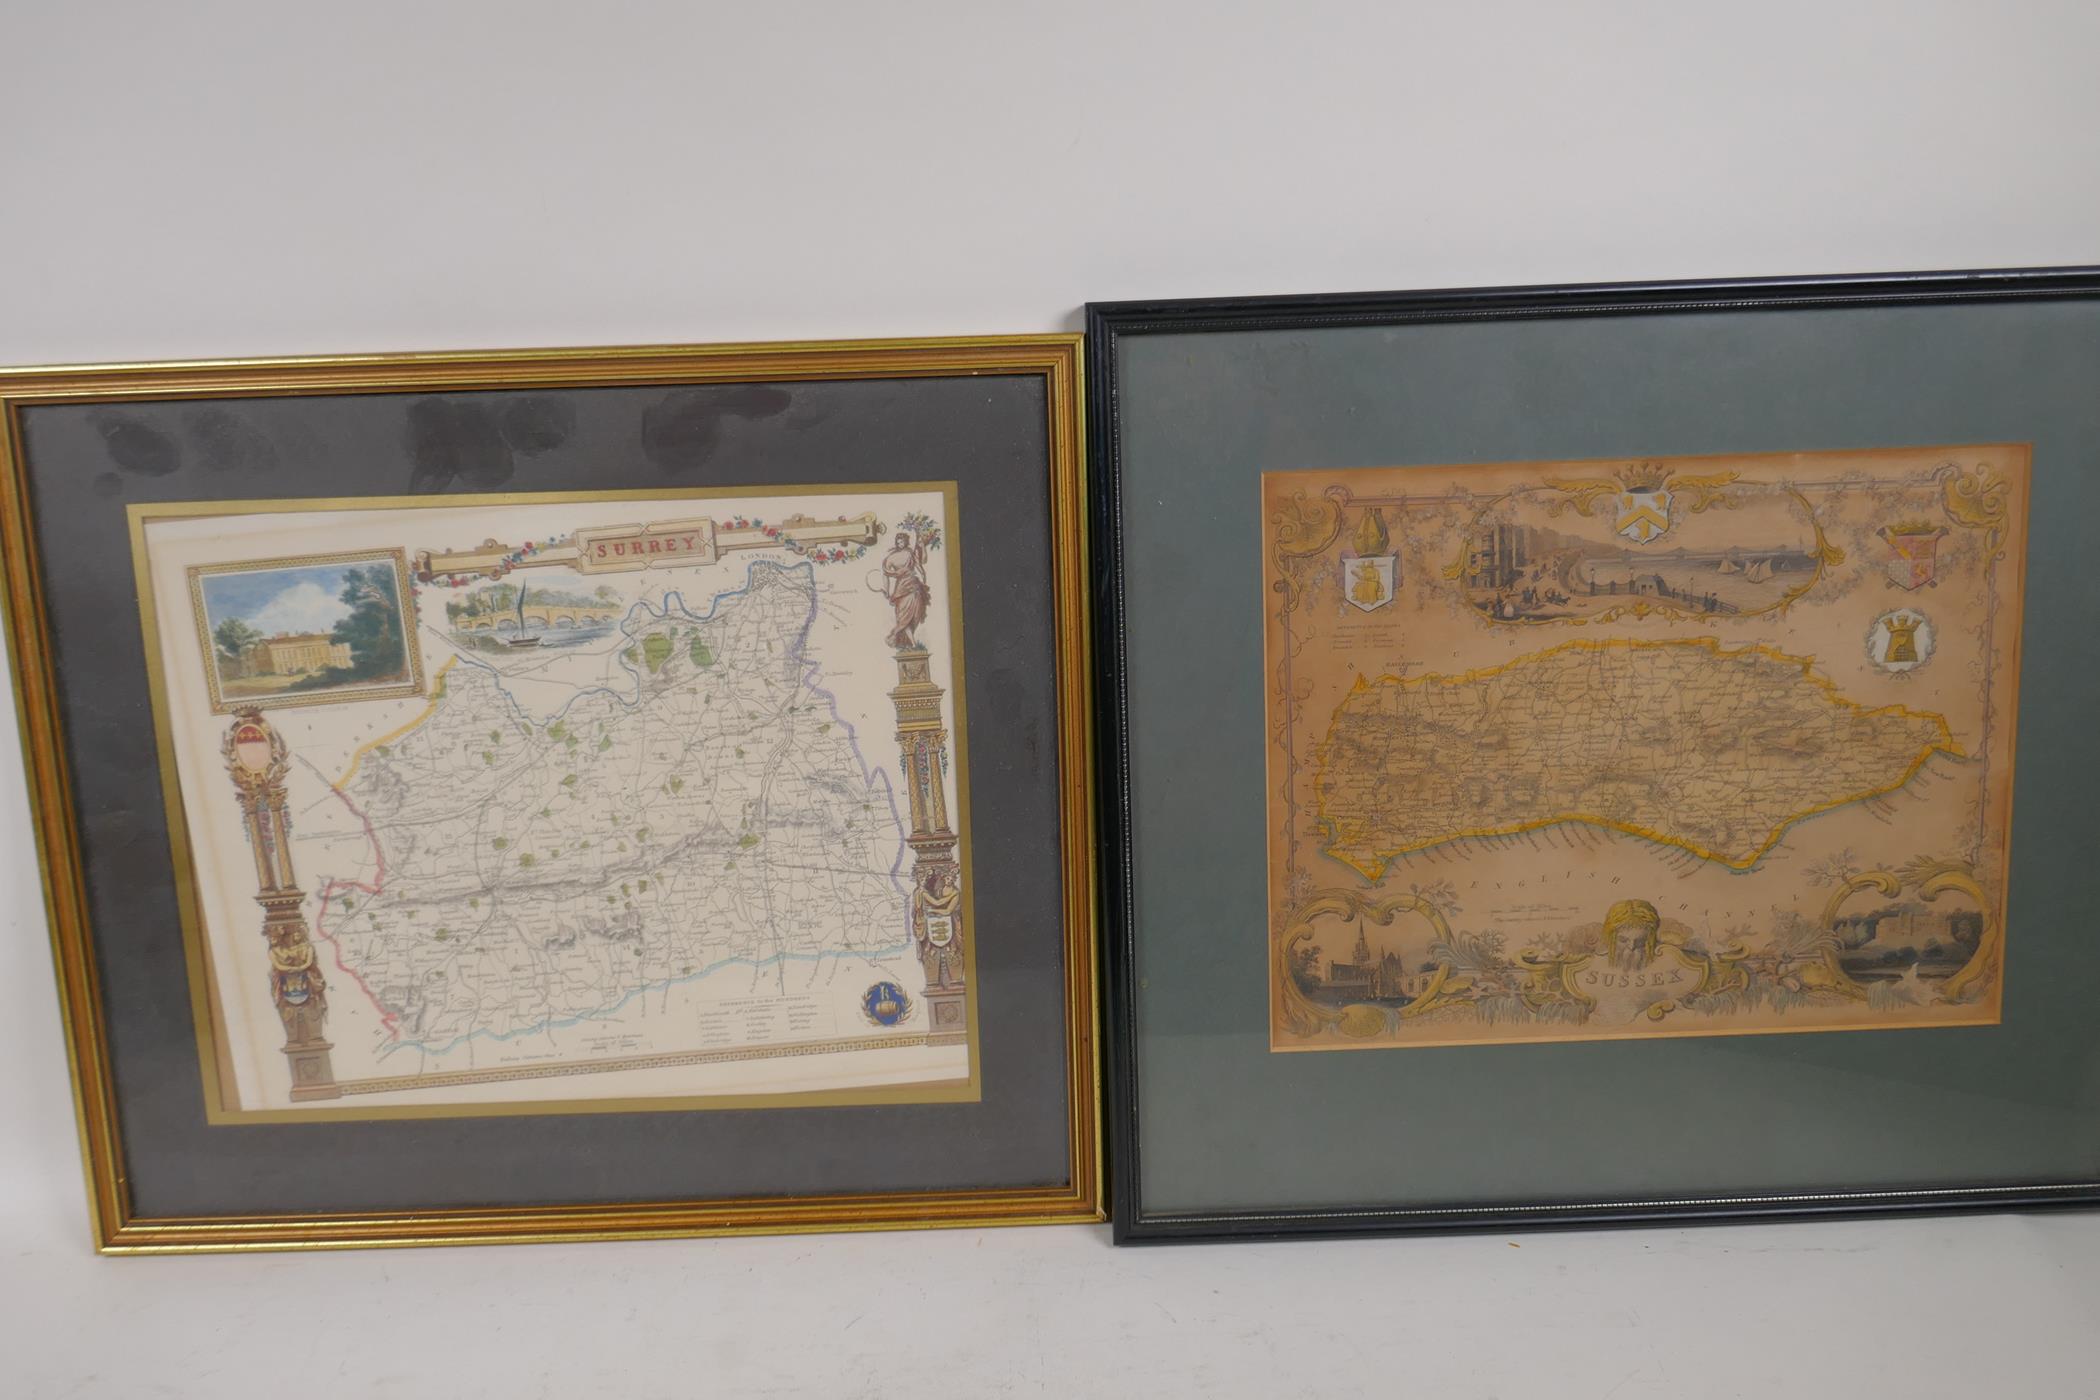 An antique map of Sussex with vignettes of Chichester Cathedral, Arundel Castle and the Chain